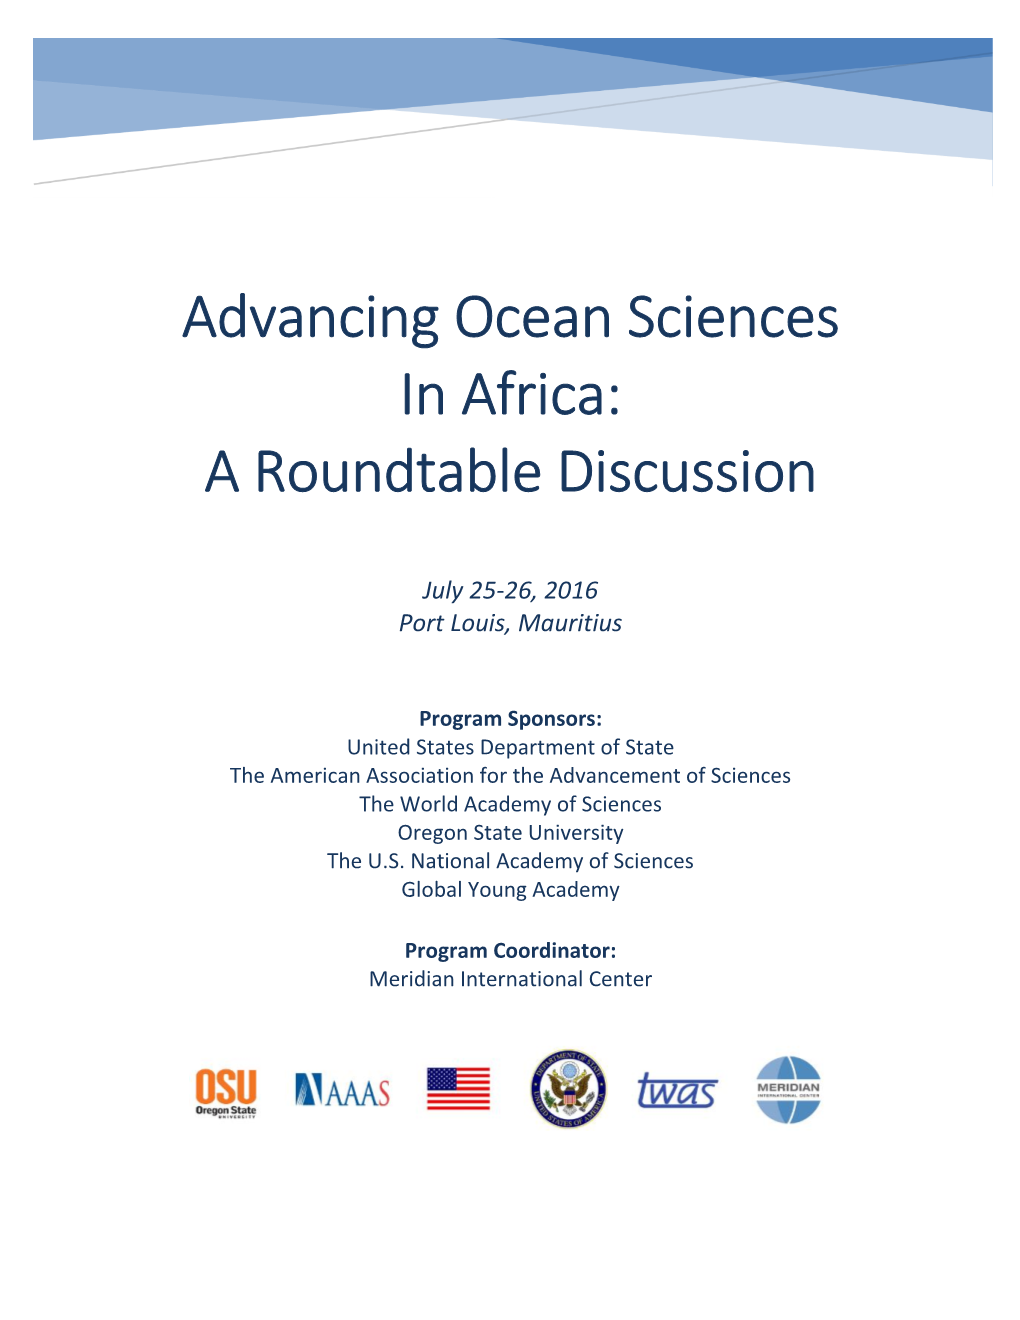 Advancing Ocean Sciences in Africa: a Roundtable Discussion